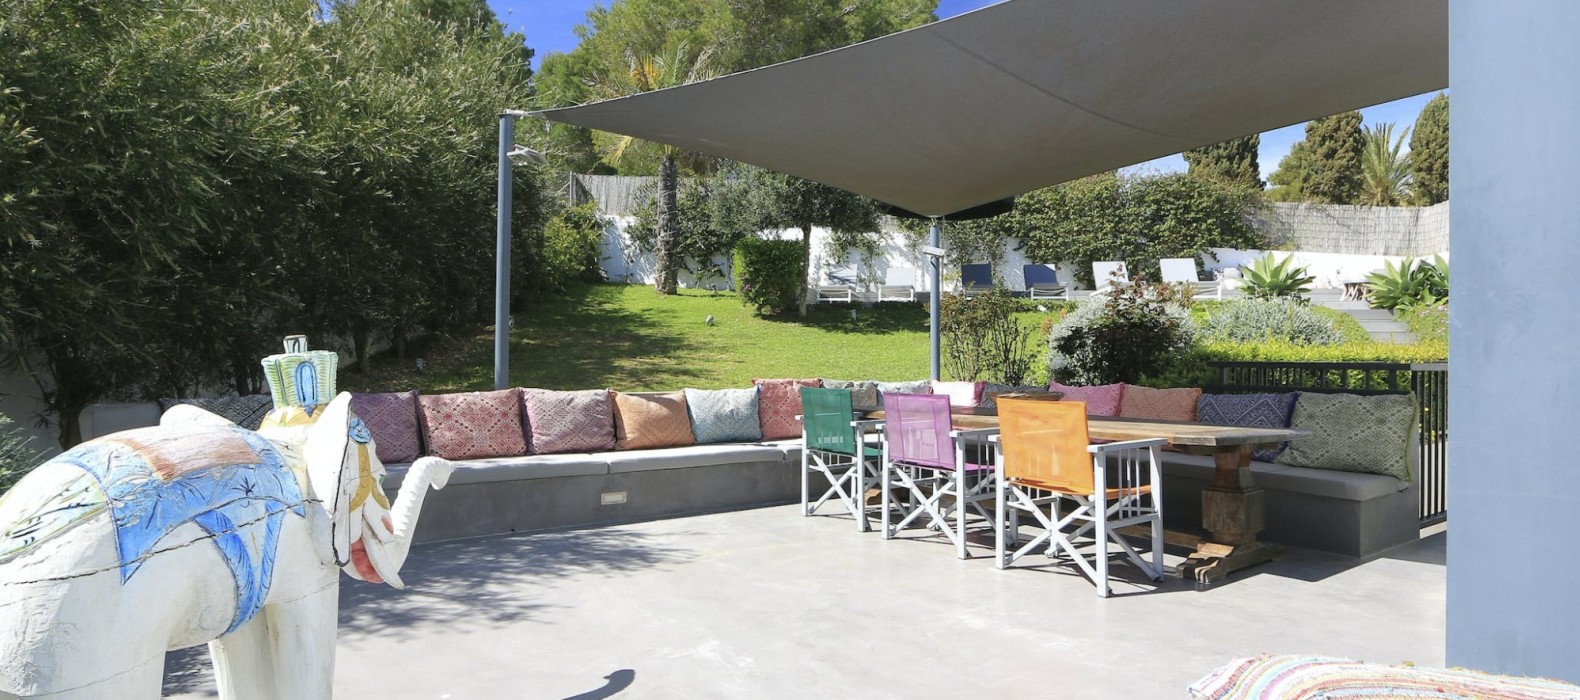 Exterior dining area of Villa Love and Light in Ibiza